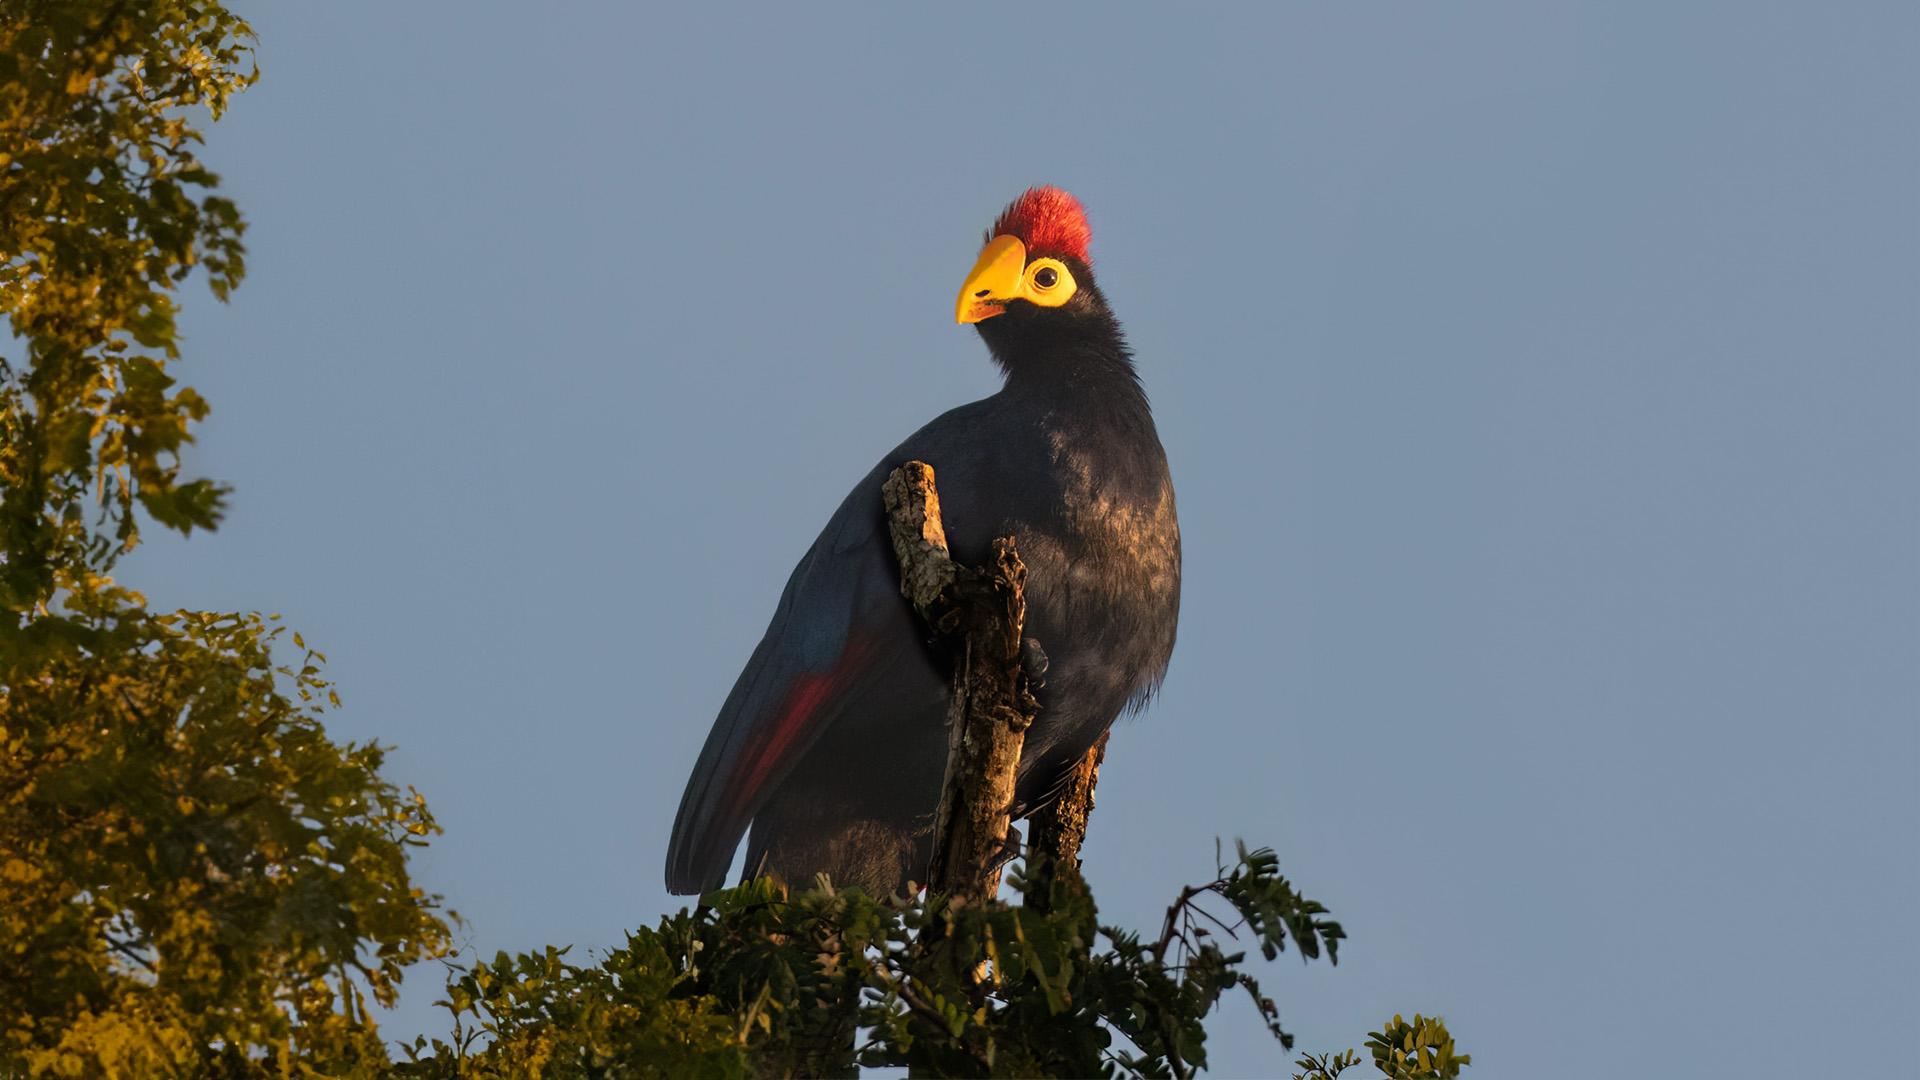 Above: A dinosaur-like Ross's turaco sits pretty in the sun